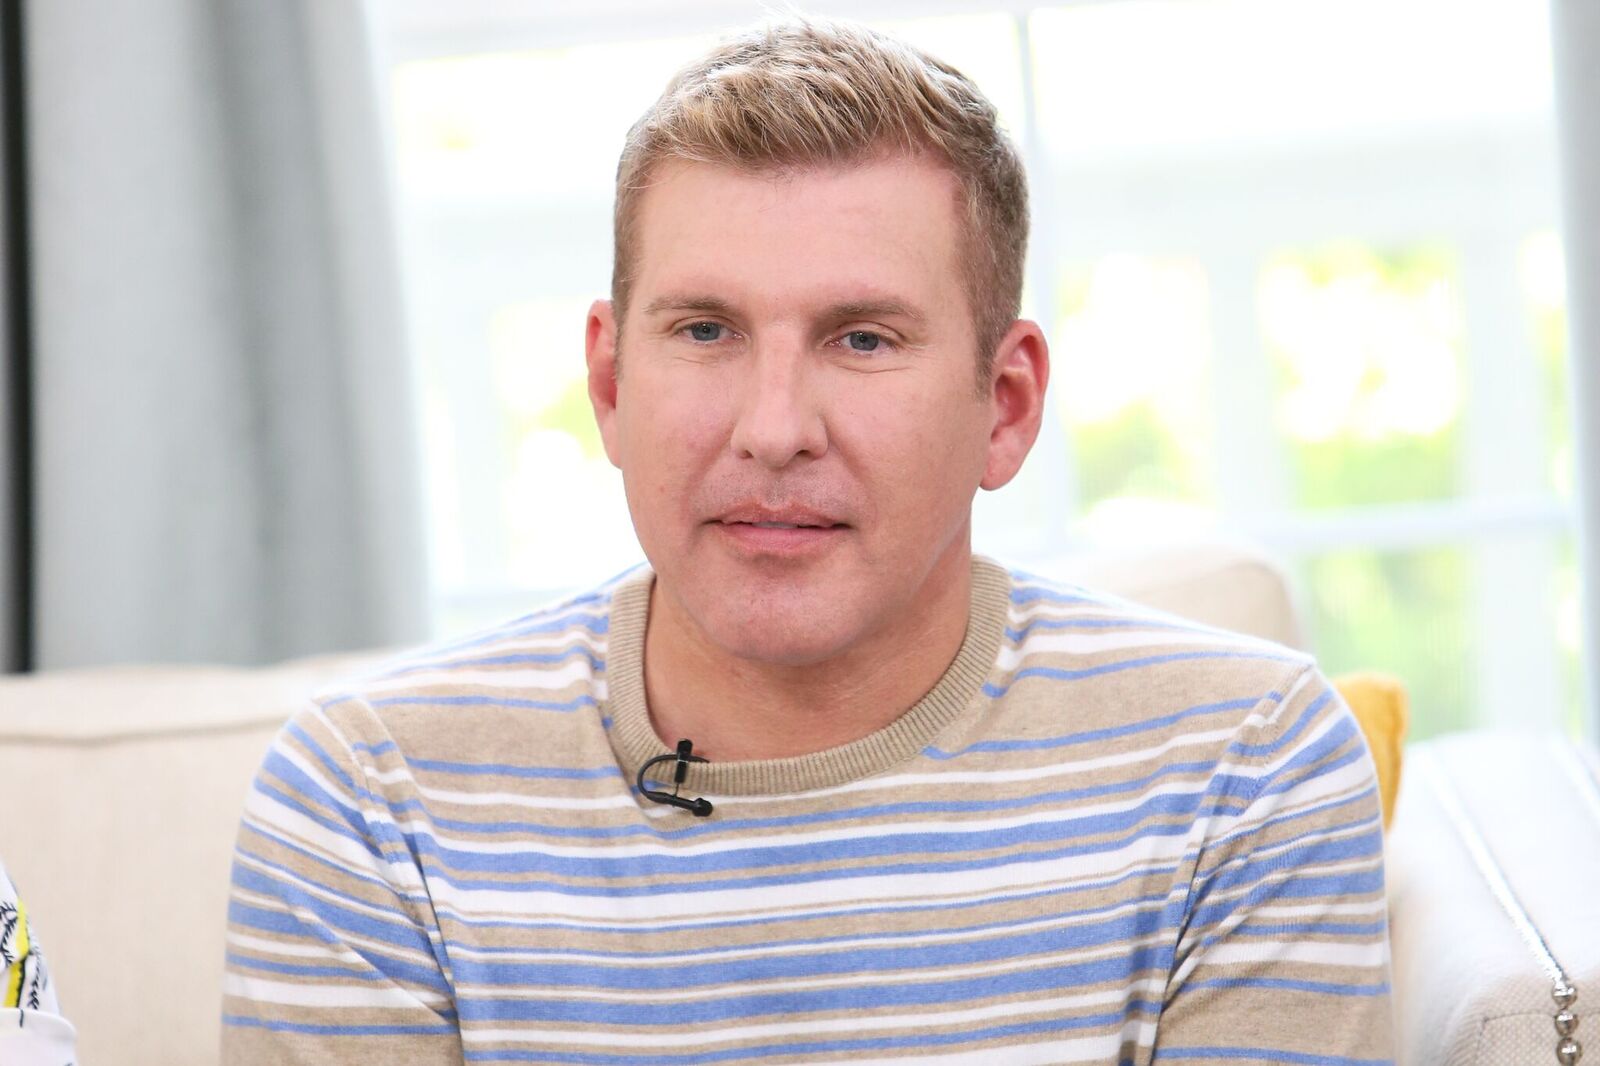 Reality TV Personality Todd Chrisley visit Hallmark's "Home & Family" at Universal Studios Hollywood on June 18, 2018 in Universal City, California